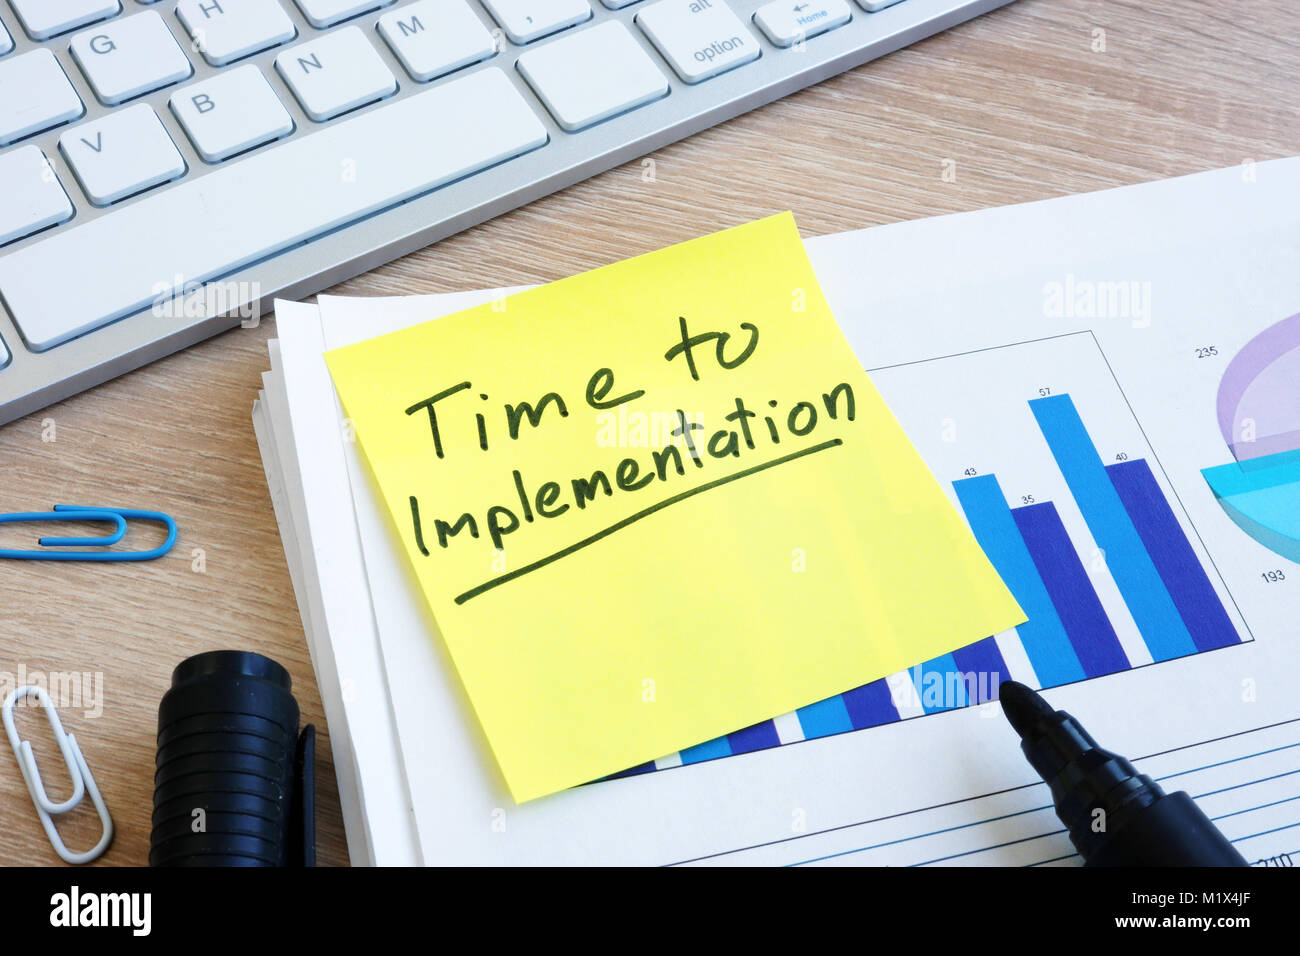 Memo stick with words Time To Implementation and documents. Stock Photo